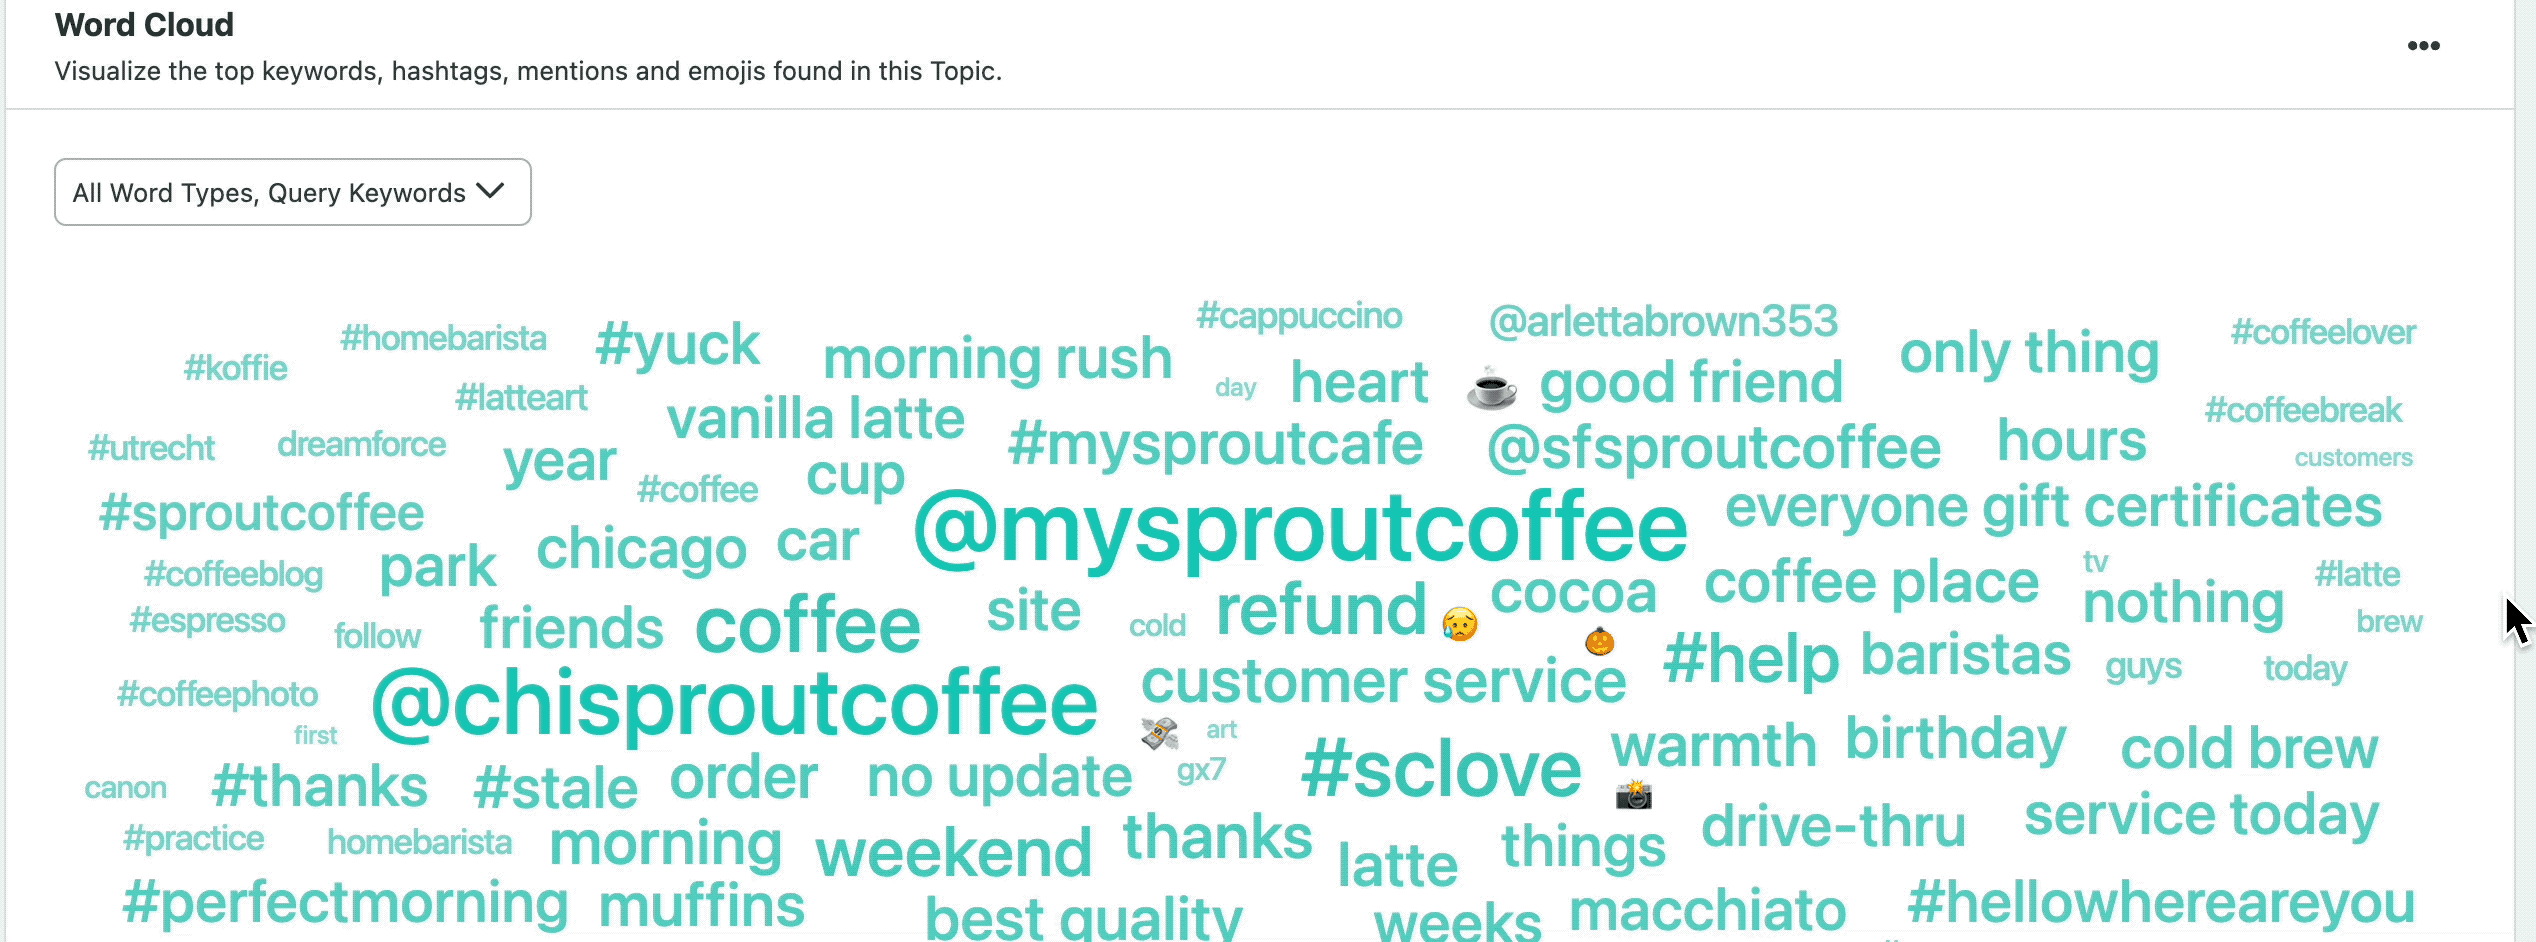 word-cloud-overview.gif